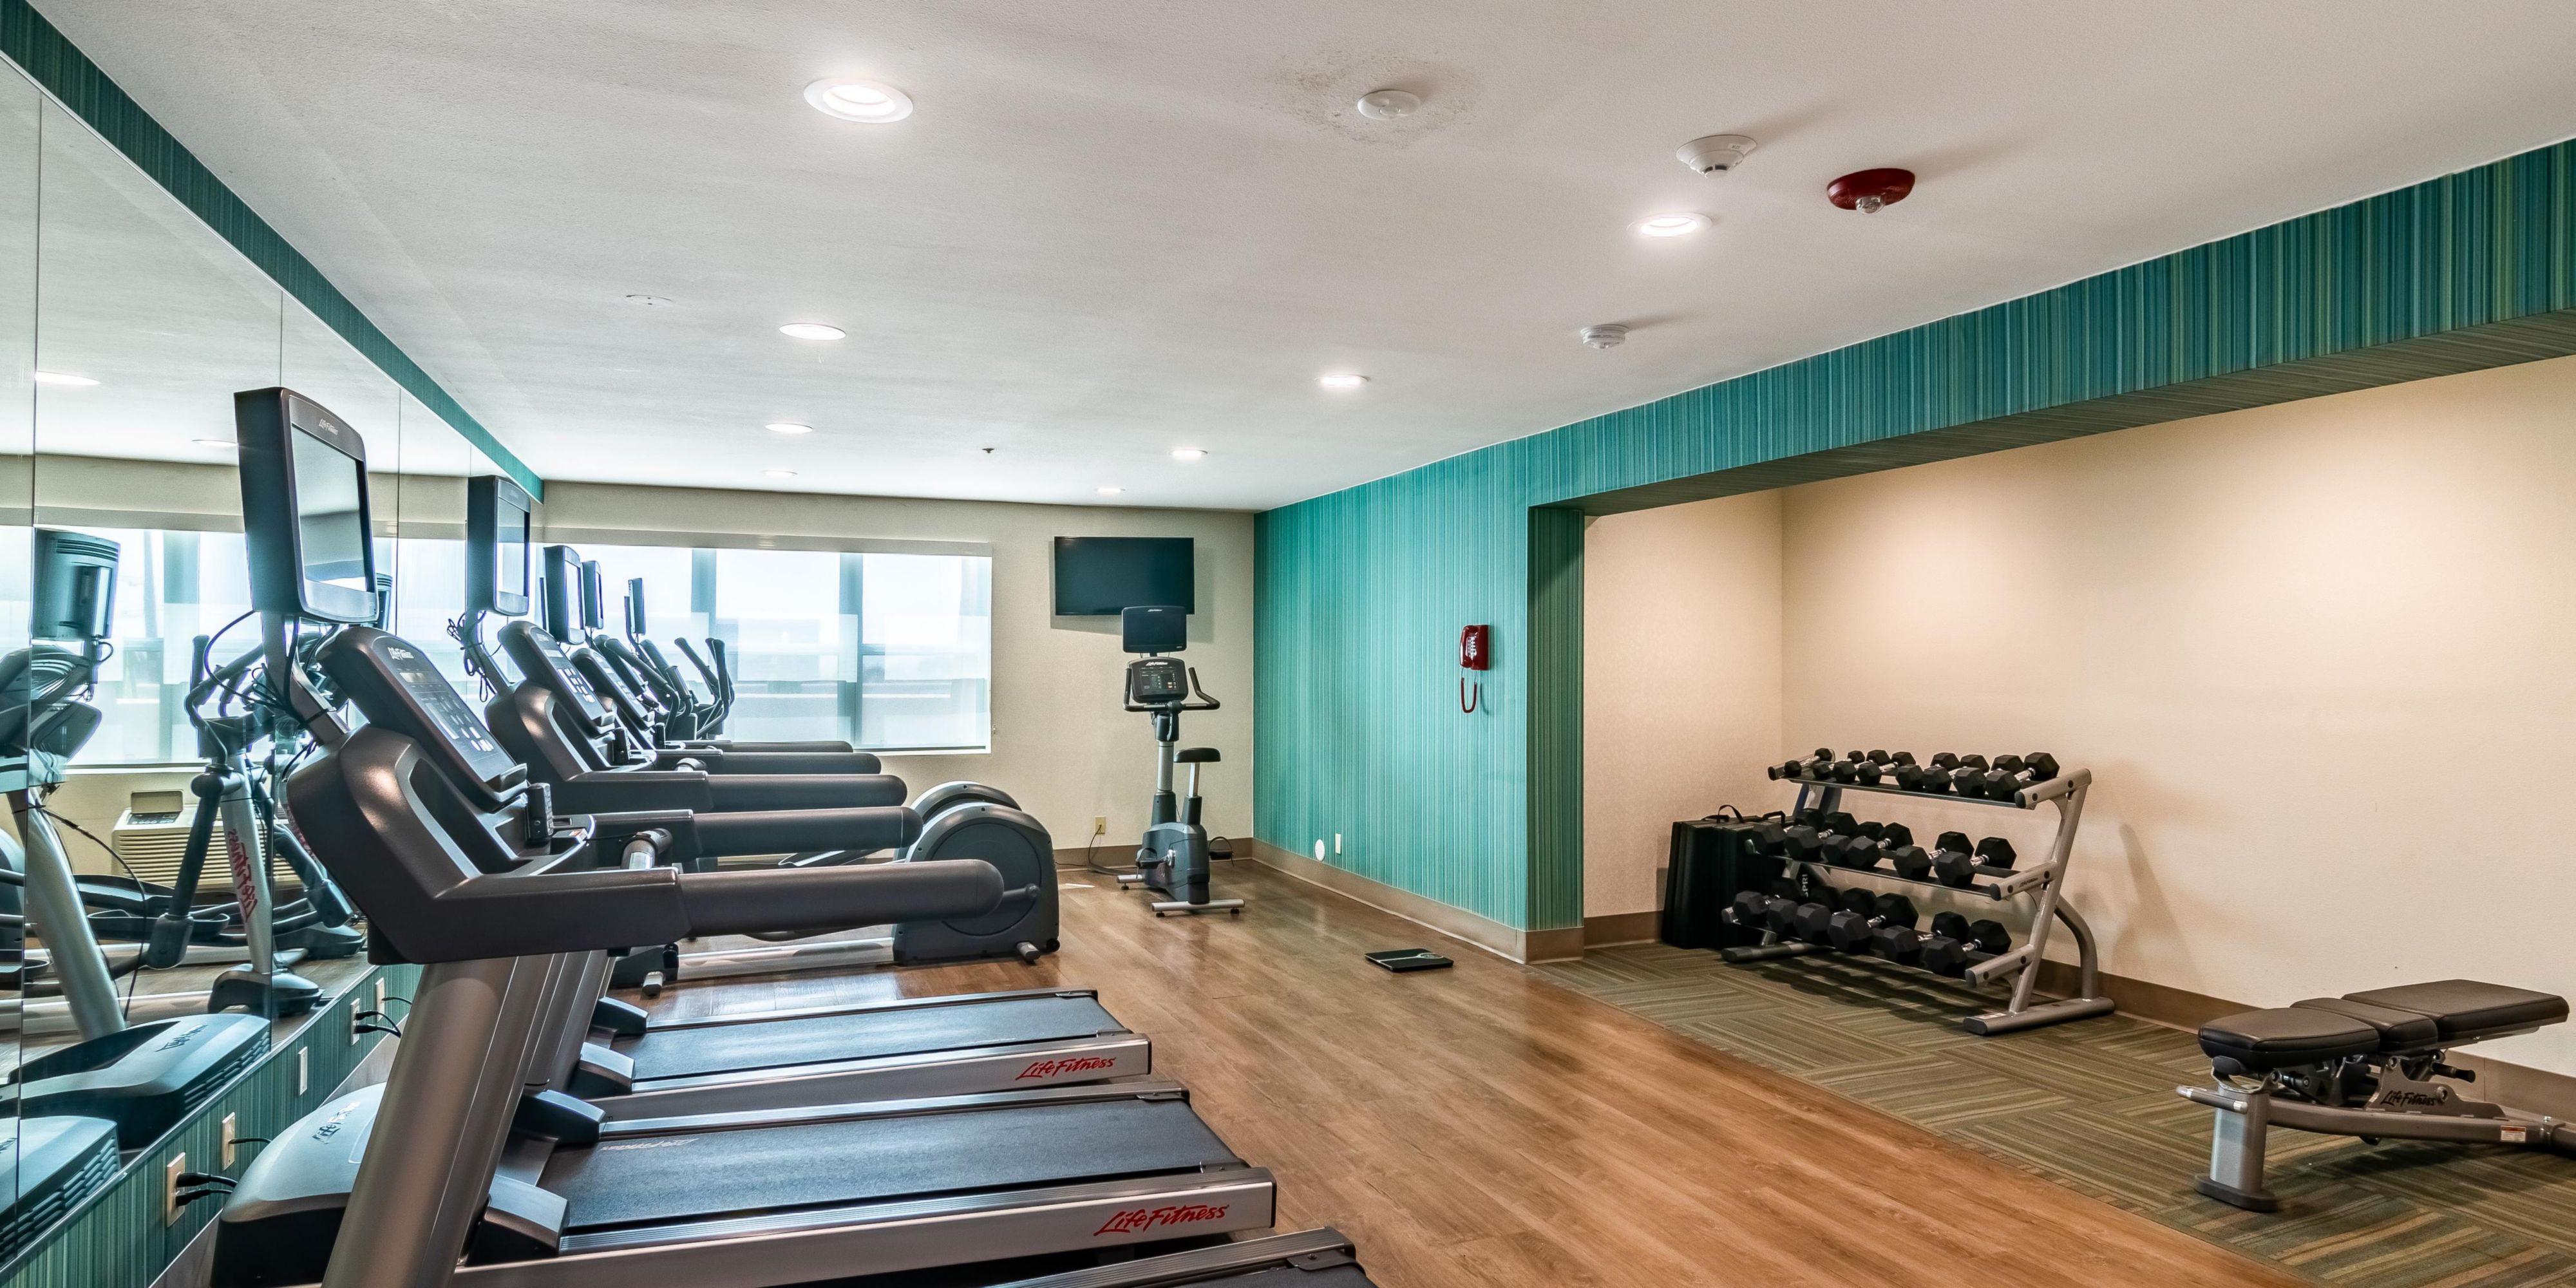 Our complimentary Fitness Center offers the flexibility to stay fit and healthy while traveling. State of the art equipment for cardio and weight work outs. Water and hand towels available.